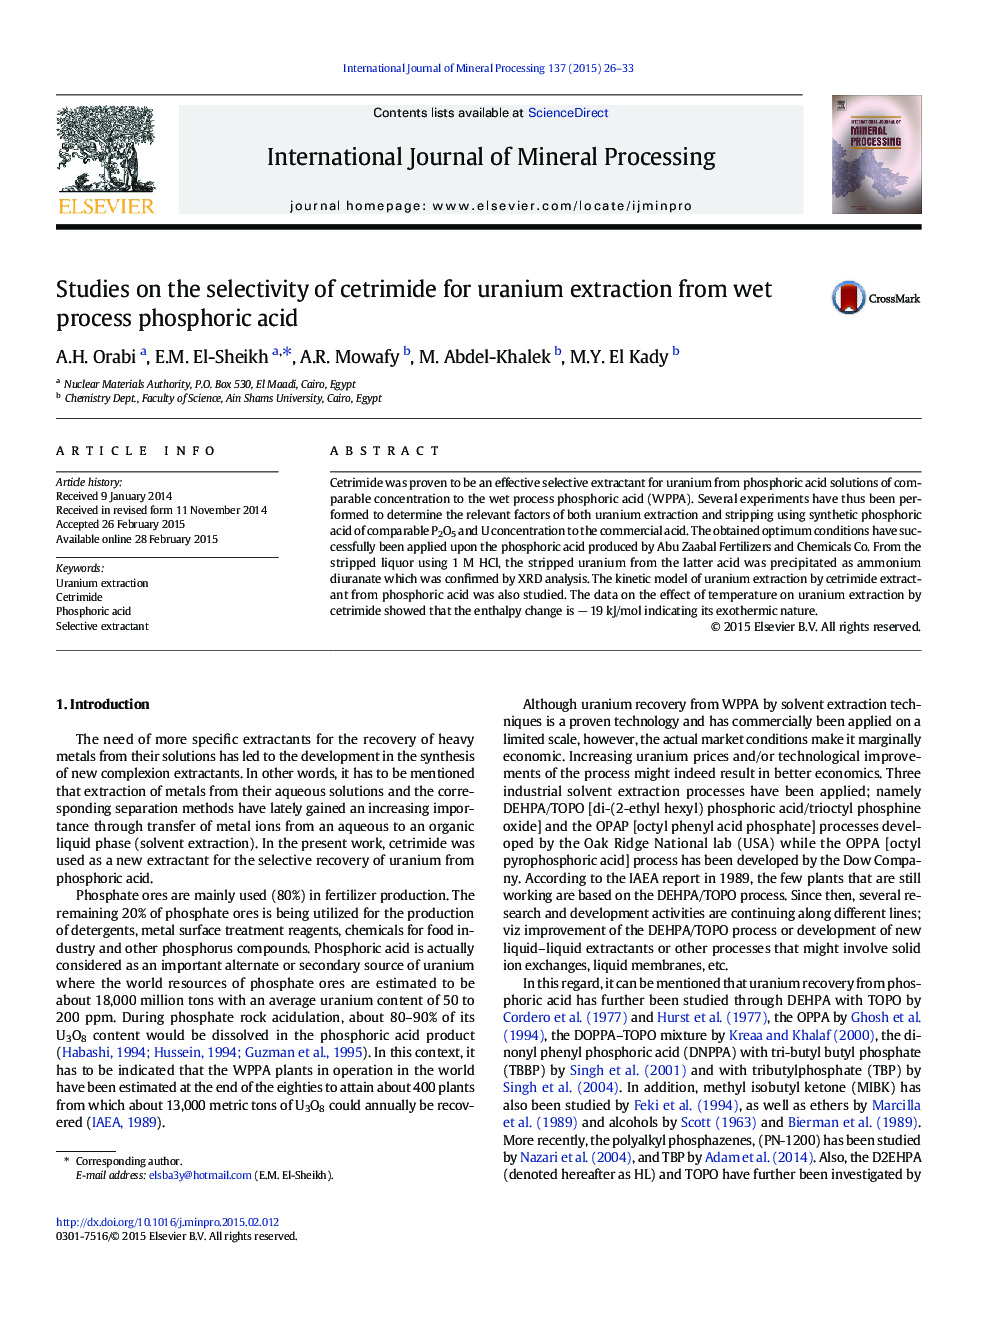 Studies on the selectivity of cetrimide for uranium extraction from wet process phosphoric acid